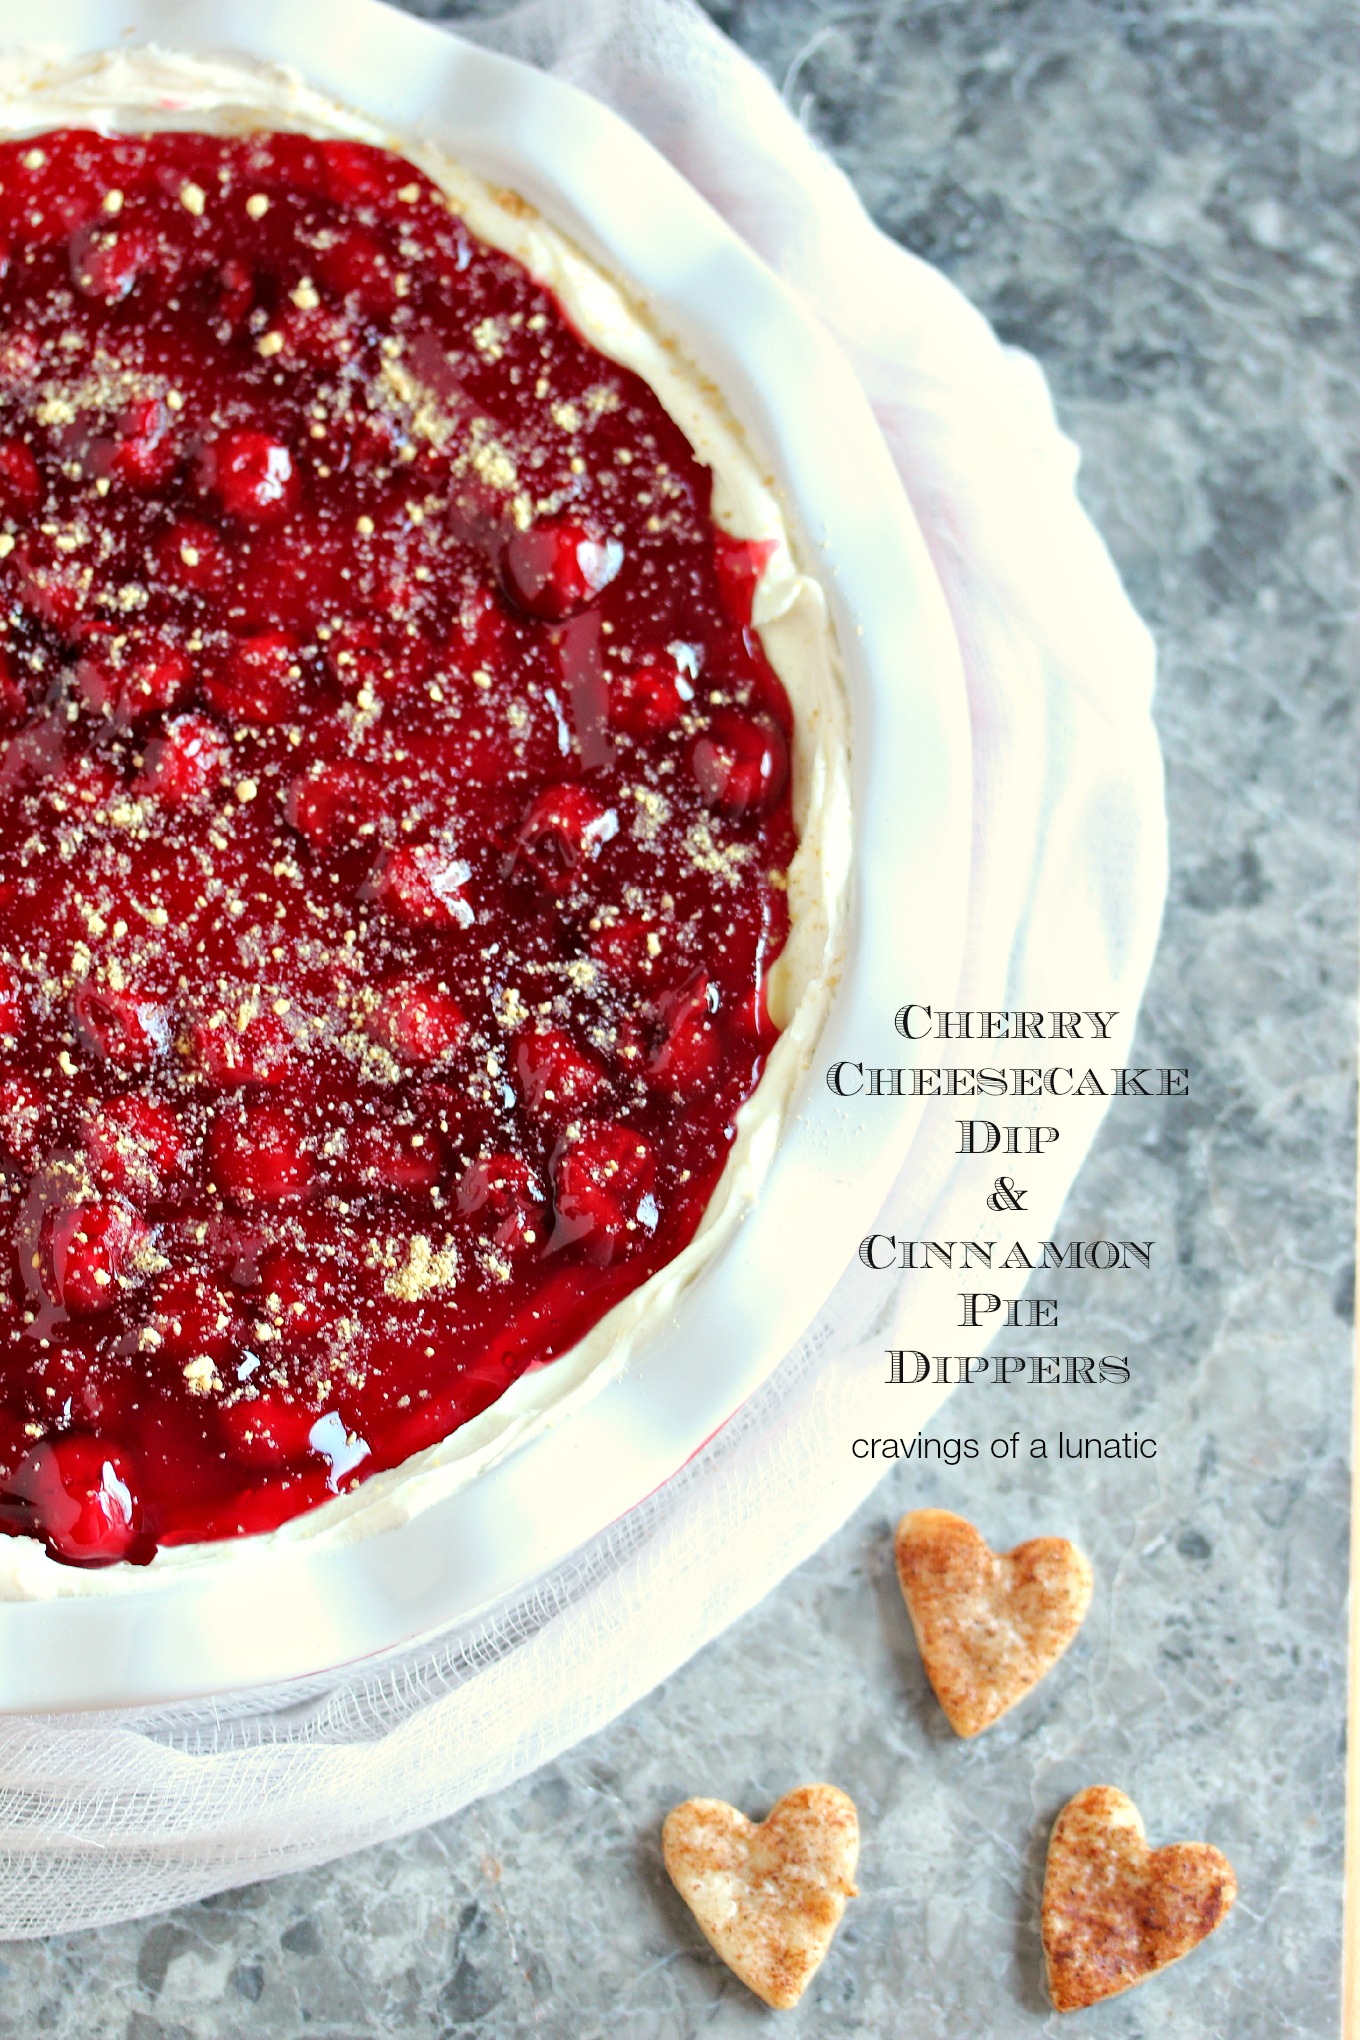 Cherry Cheesecake Dip with Cinnamon Pie Dippers {Cravings of a Lunatic}